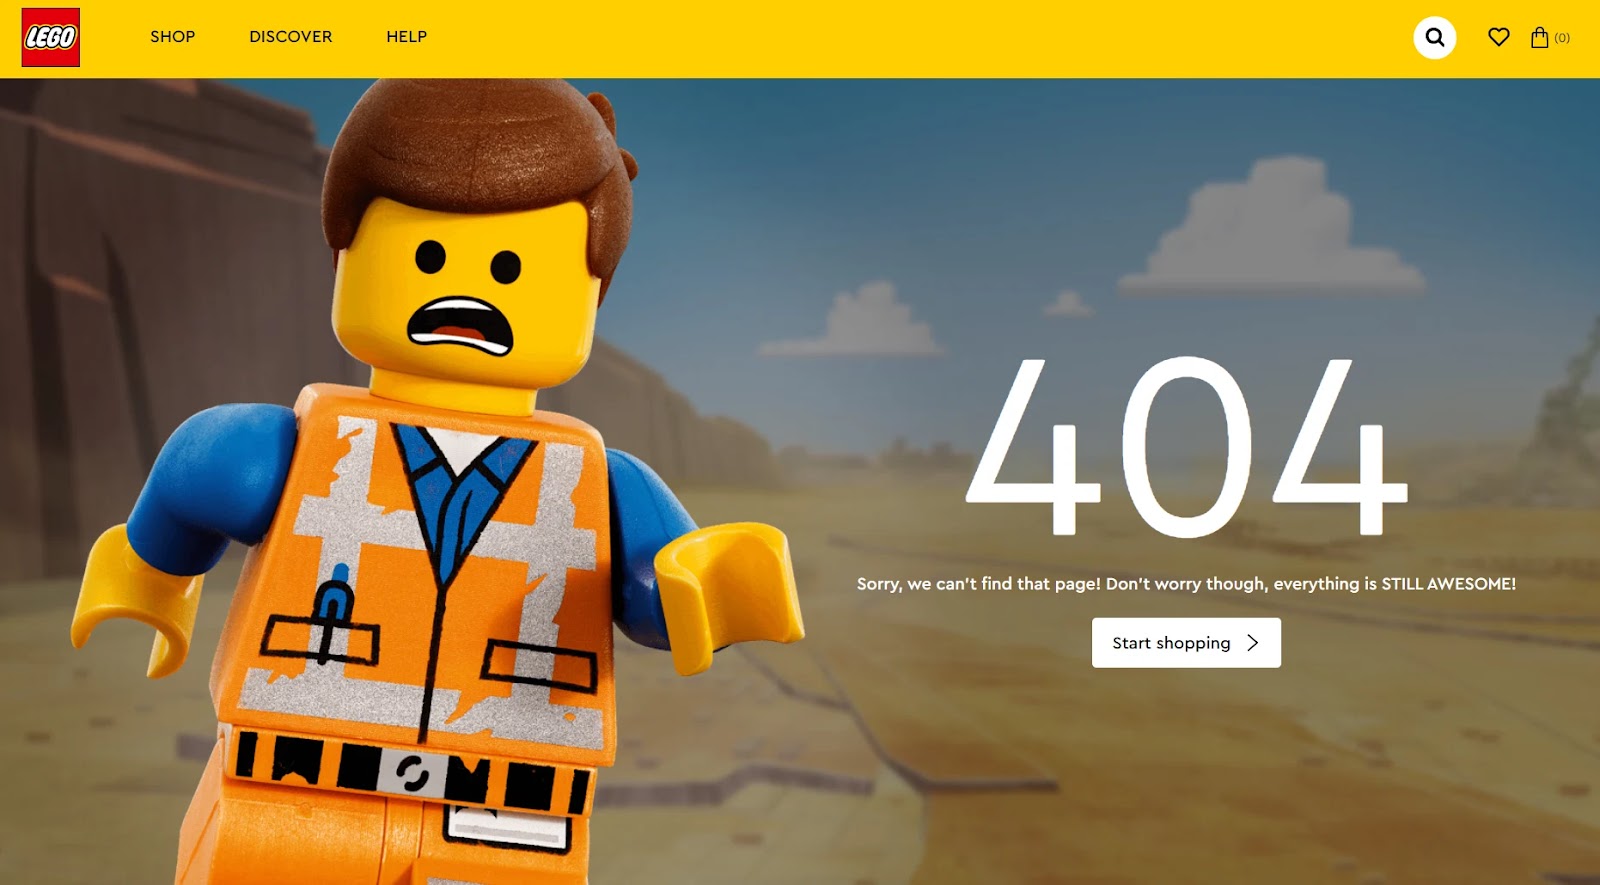 An error page on Lego's website